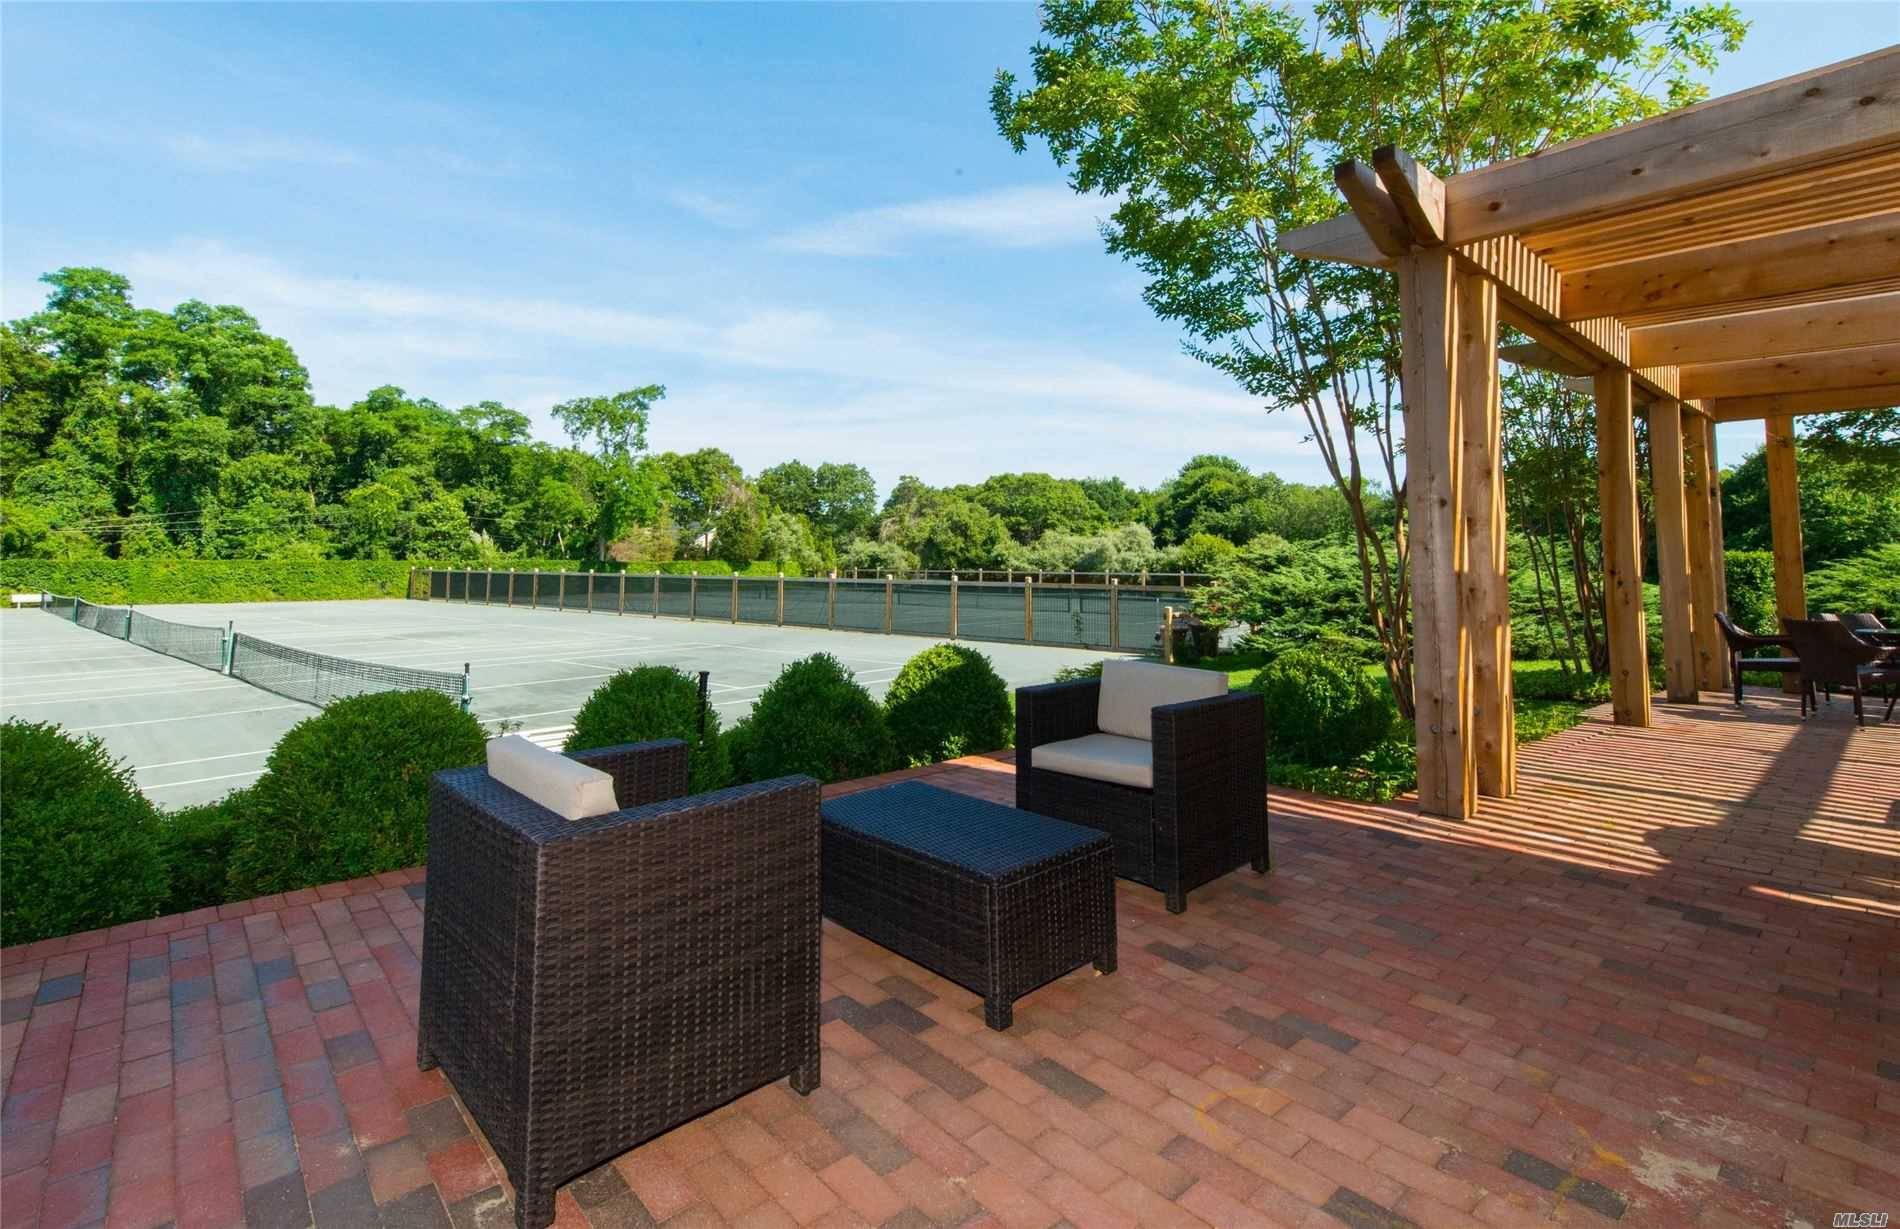 A truly unique opportunity to own an active beautifully landscaped tennis club in an upscale, thriving community.